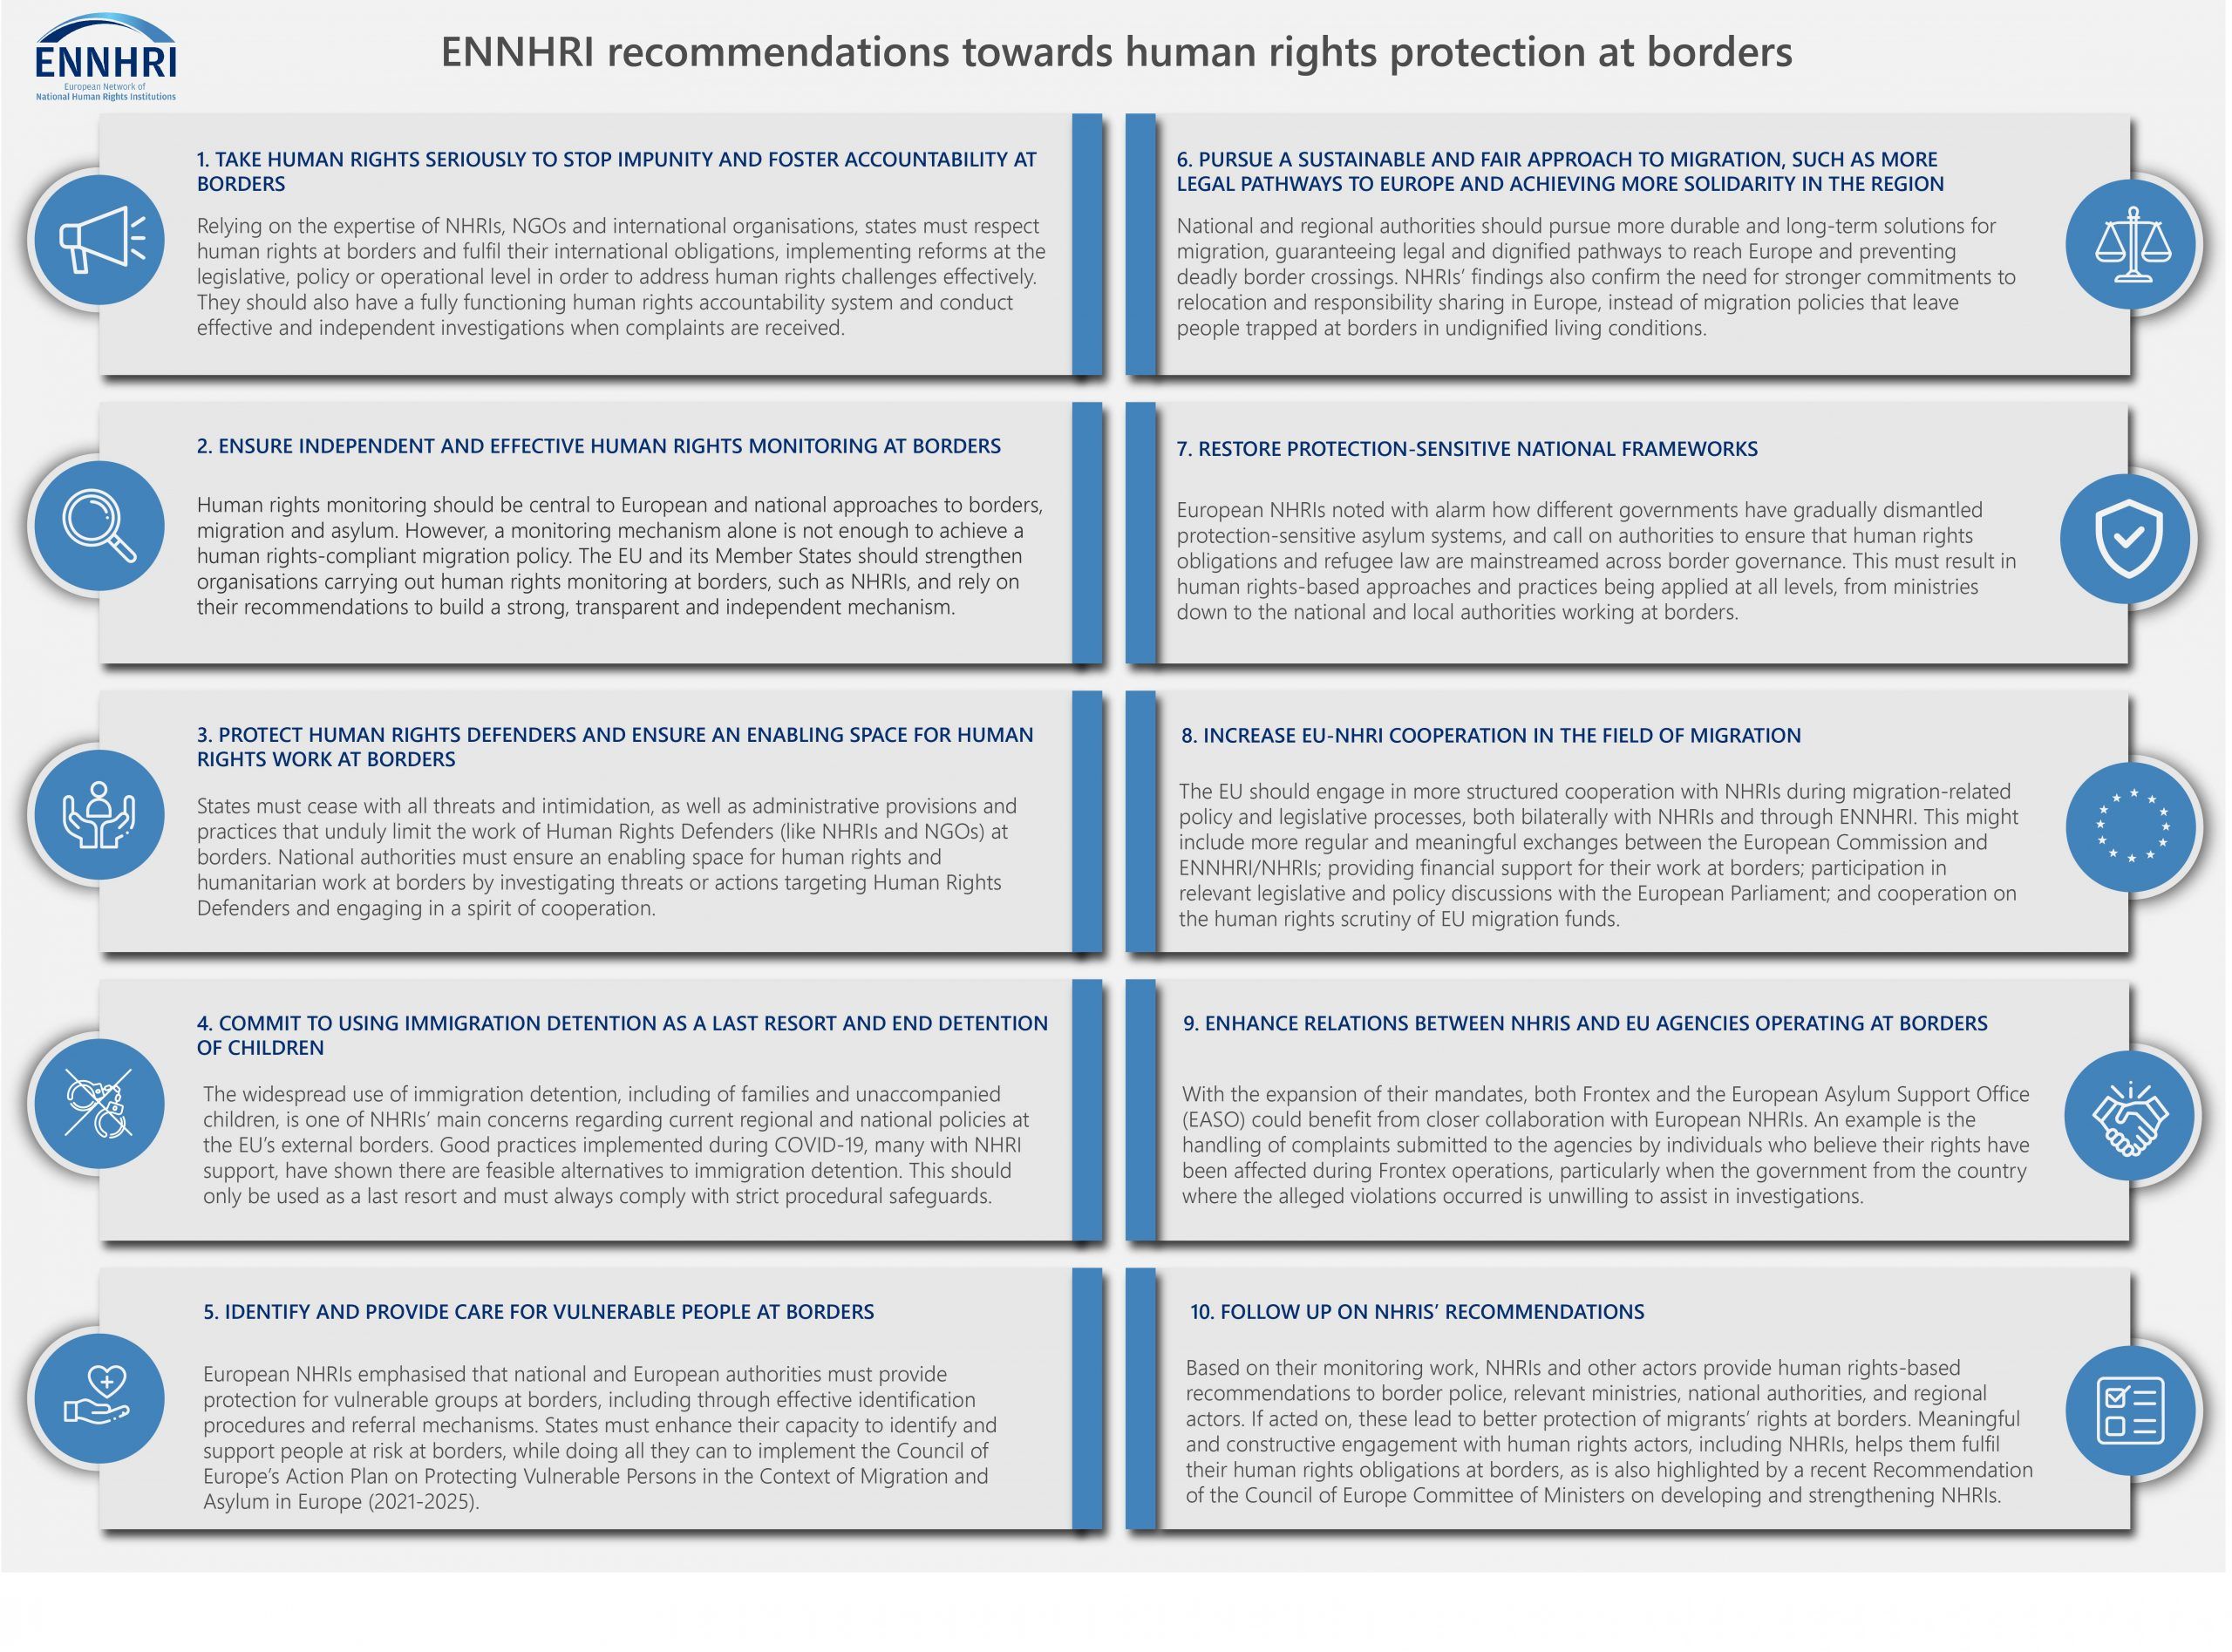 TABLE: 10 recommendations towards human rights protection at borders